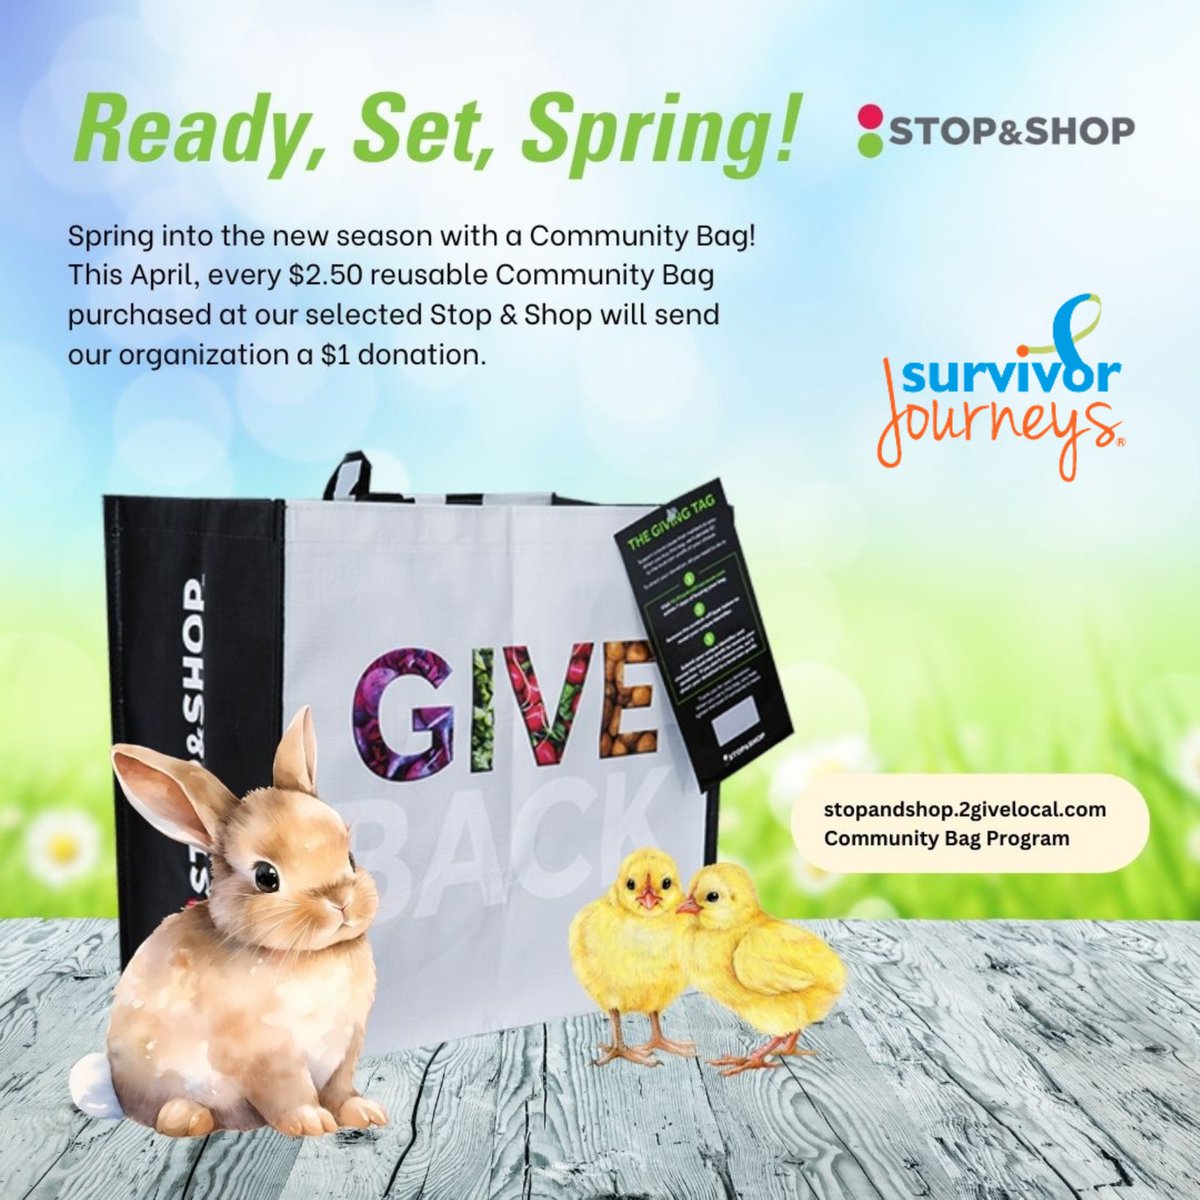 The days are counting down to purchase your Stop & Shop reusable bag at the 470 North Main Street, East Longmeadow, Massachusetts location! All donations are greatly appreciated and help our organization continue to provide support groups, mentor programs, and our resource hub!